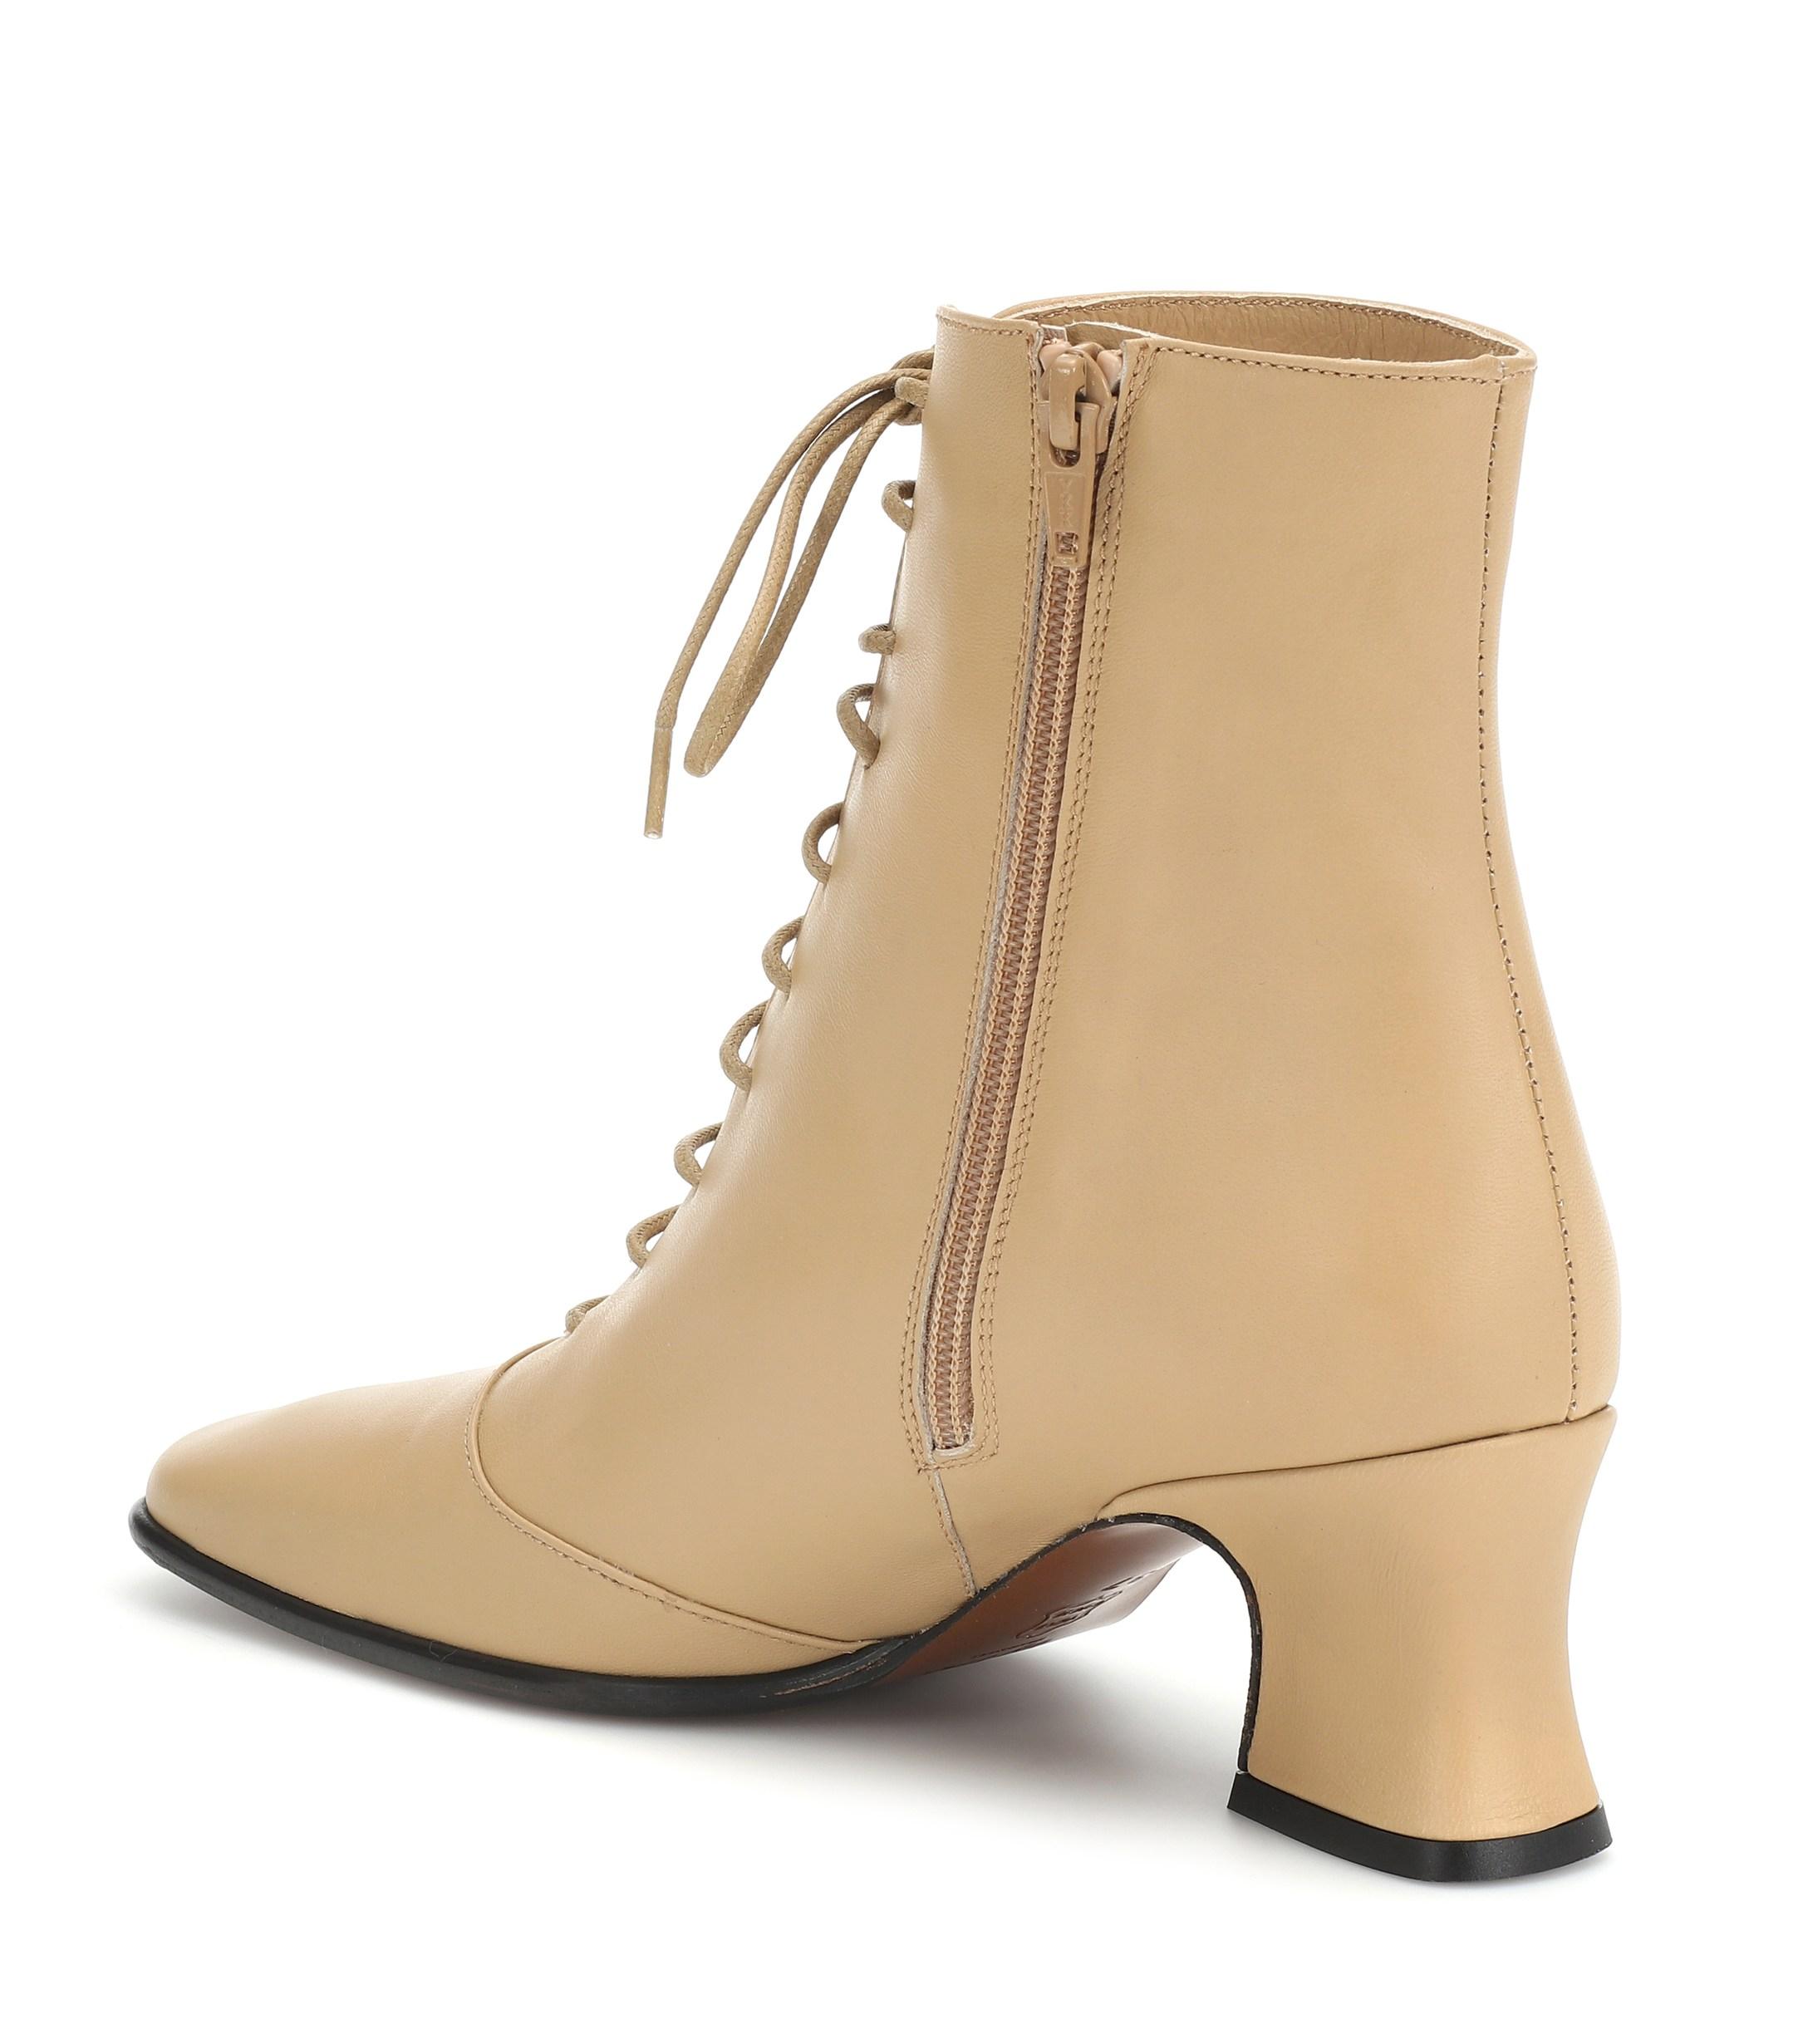 BY FAR Kate Leather Ankle Boots in Cream (Natural) - Lyst